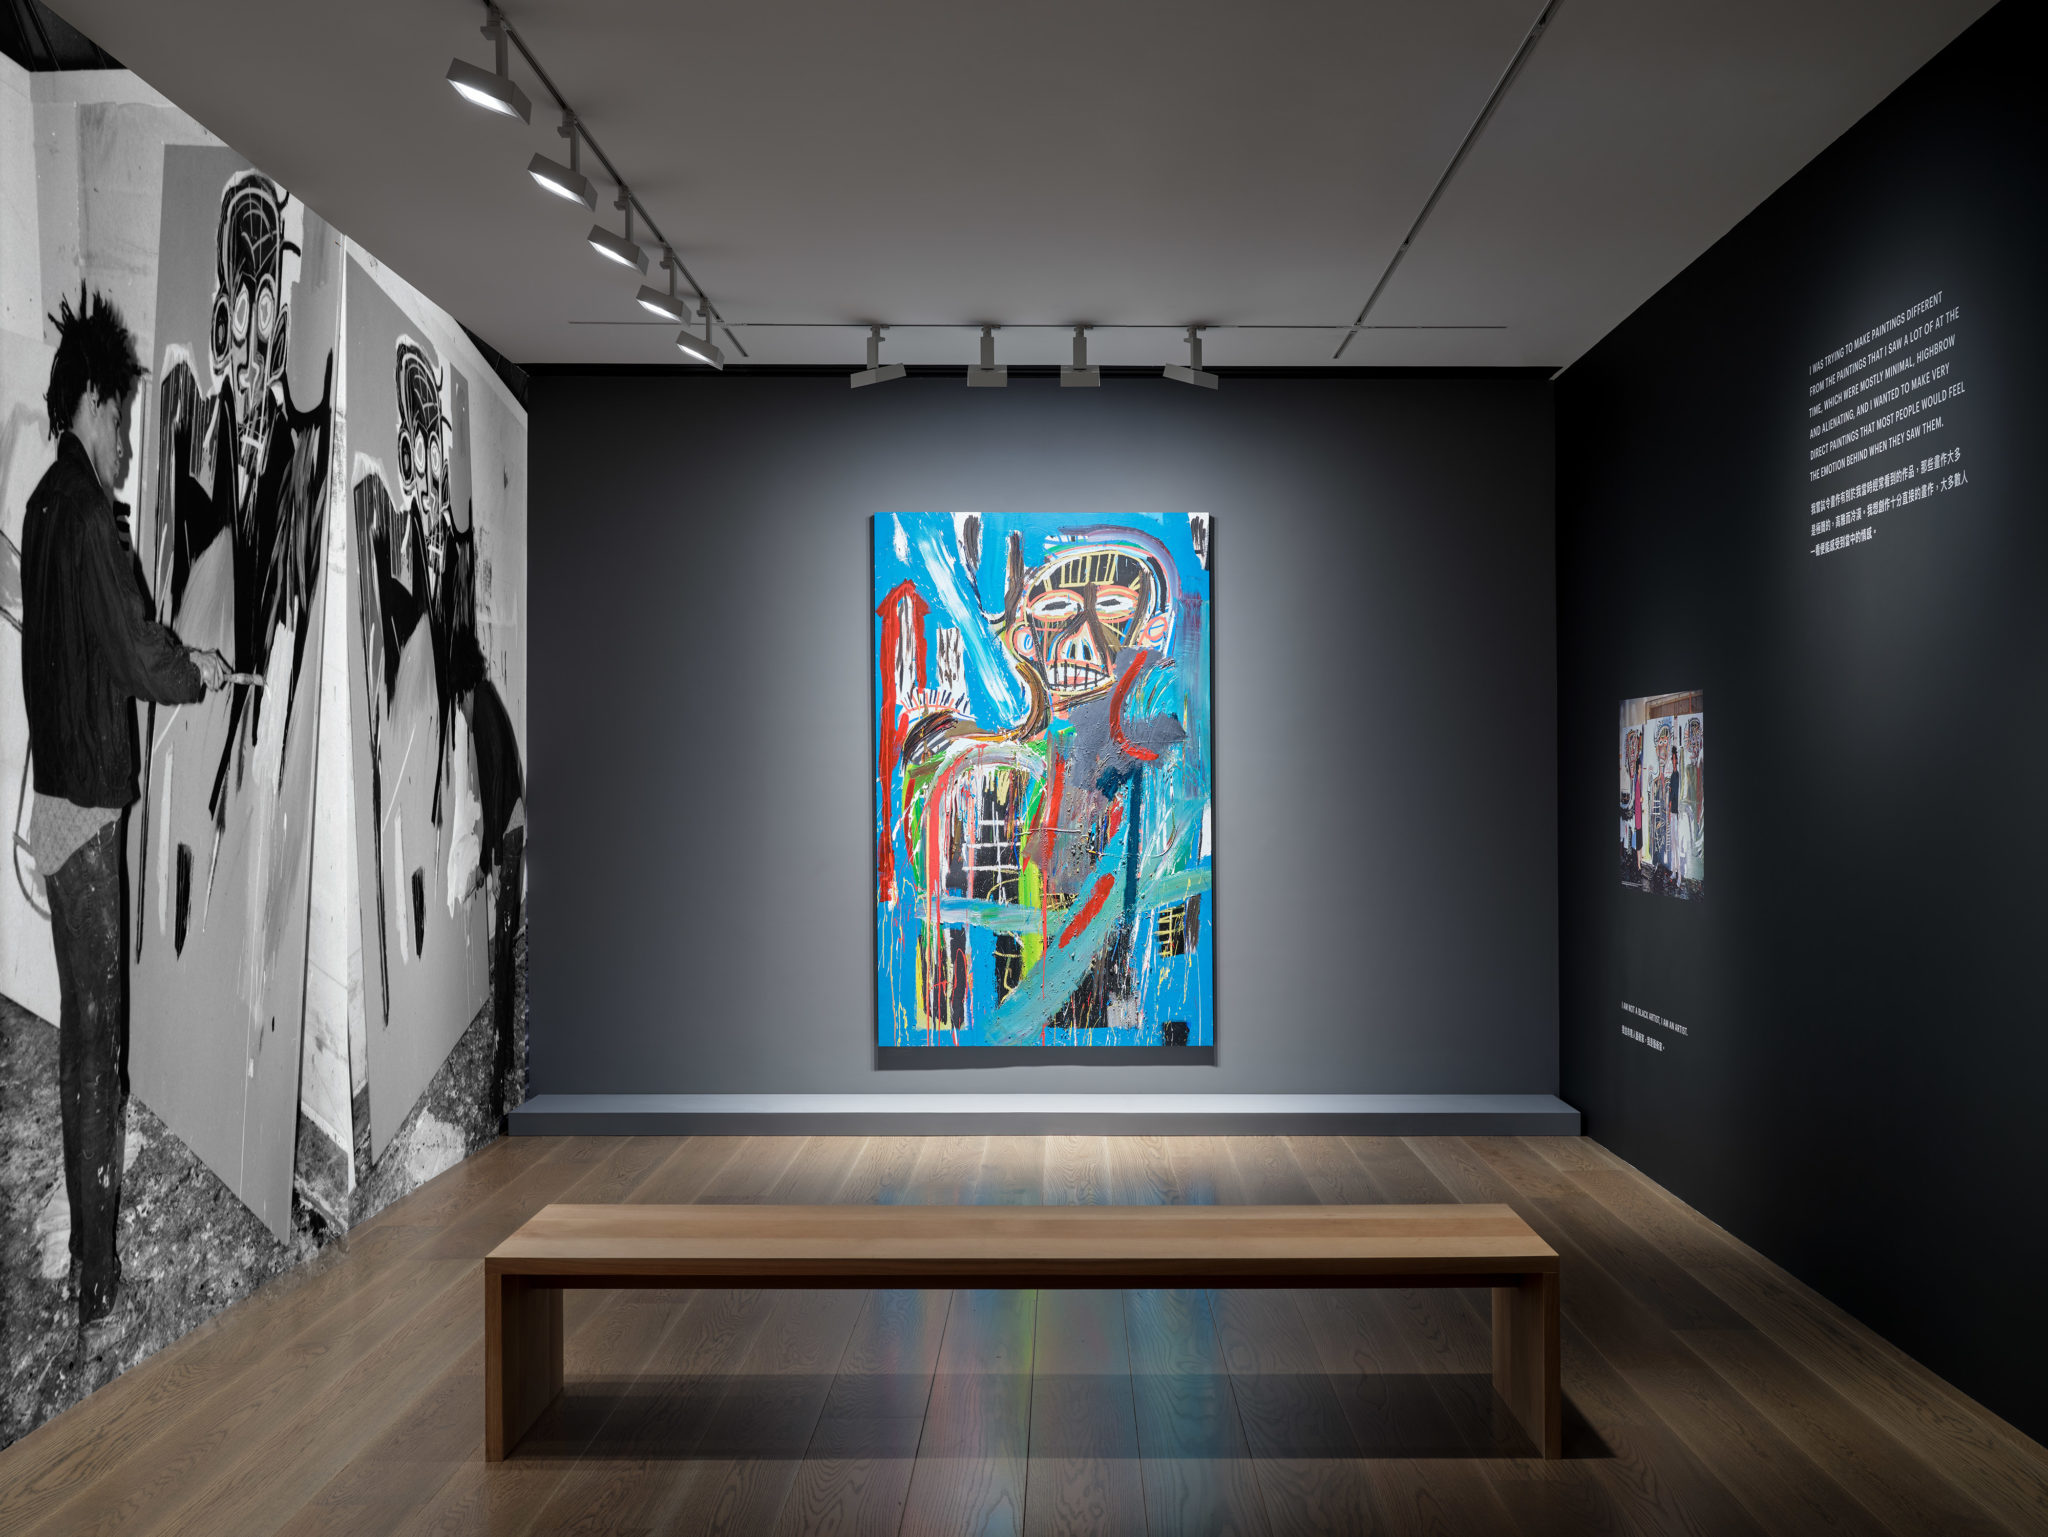 Installation view of REVEAL | Jean-Michel Basquiat: Royalty, Heroism, and the Streets, Lévy Gorvy Hong Kong, 2020